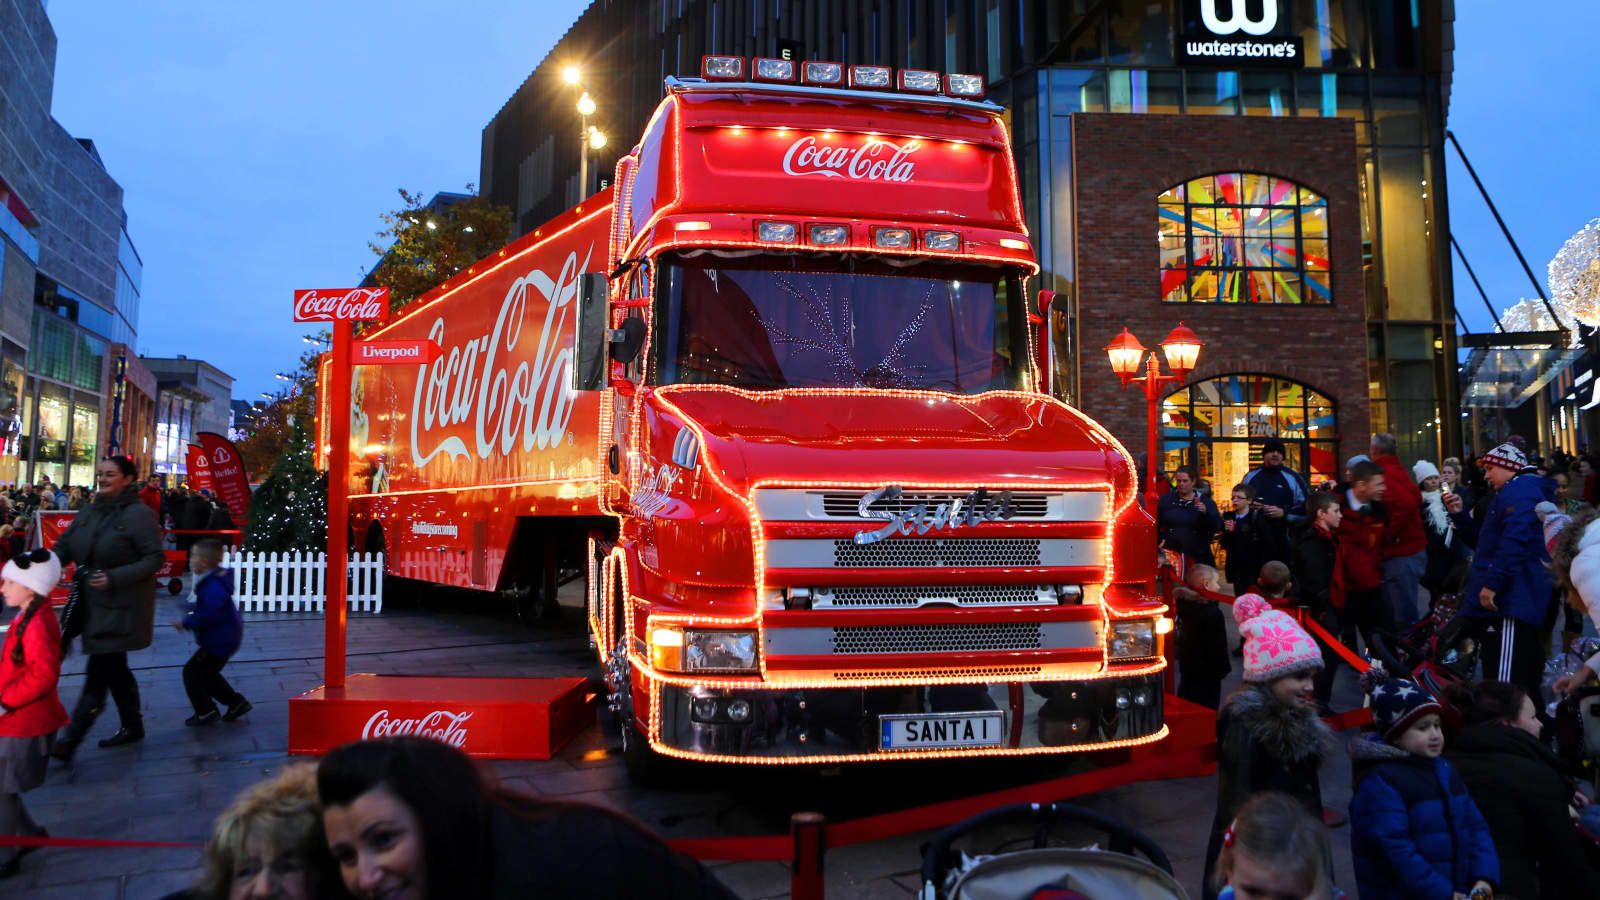 Coca Cola Christmas Truck Tour Scaled Back In The UK After Backlash From Campaigners